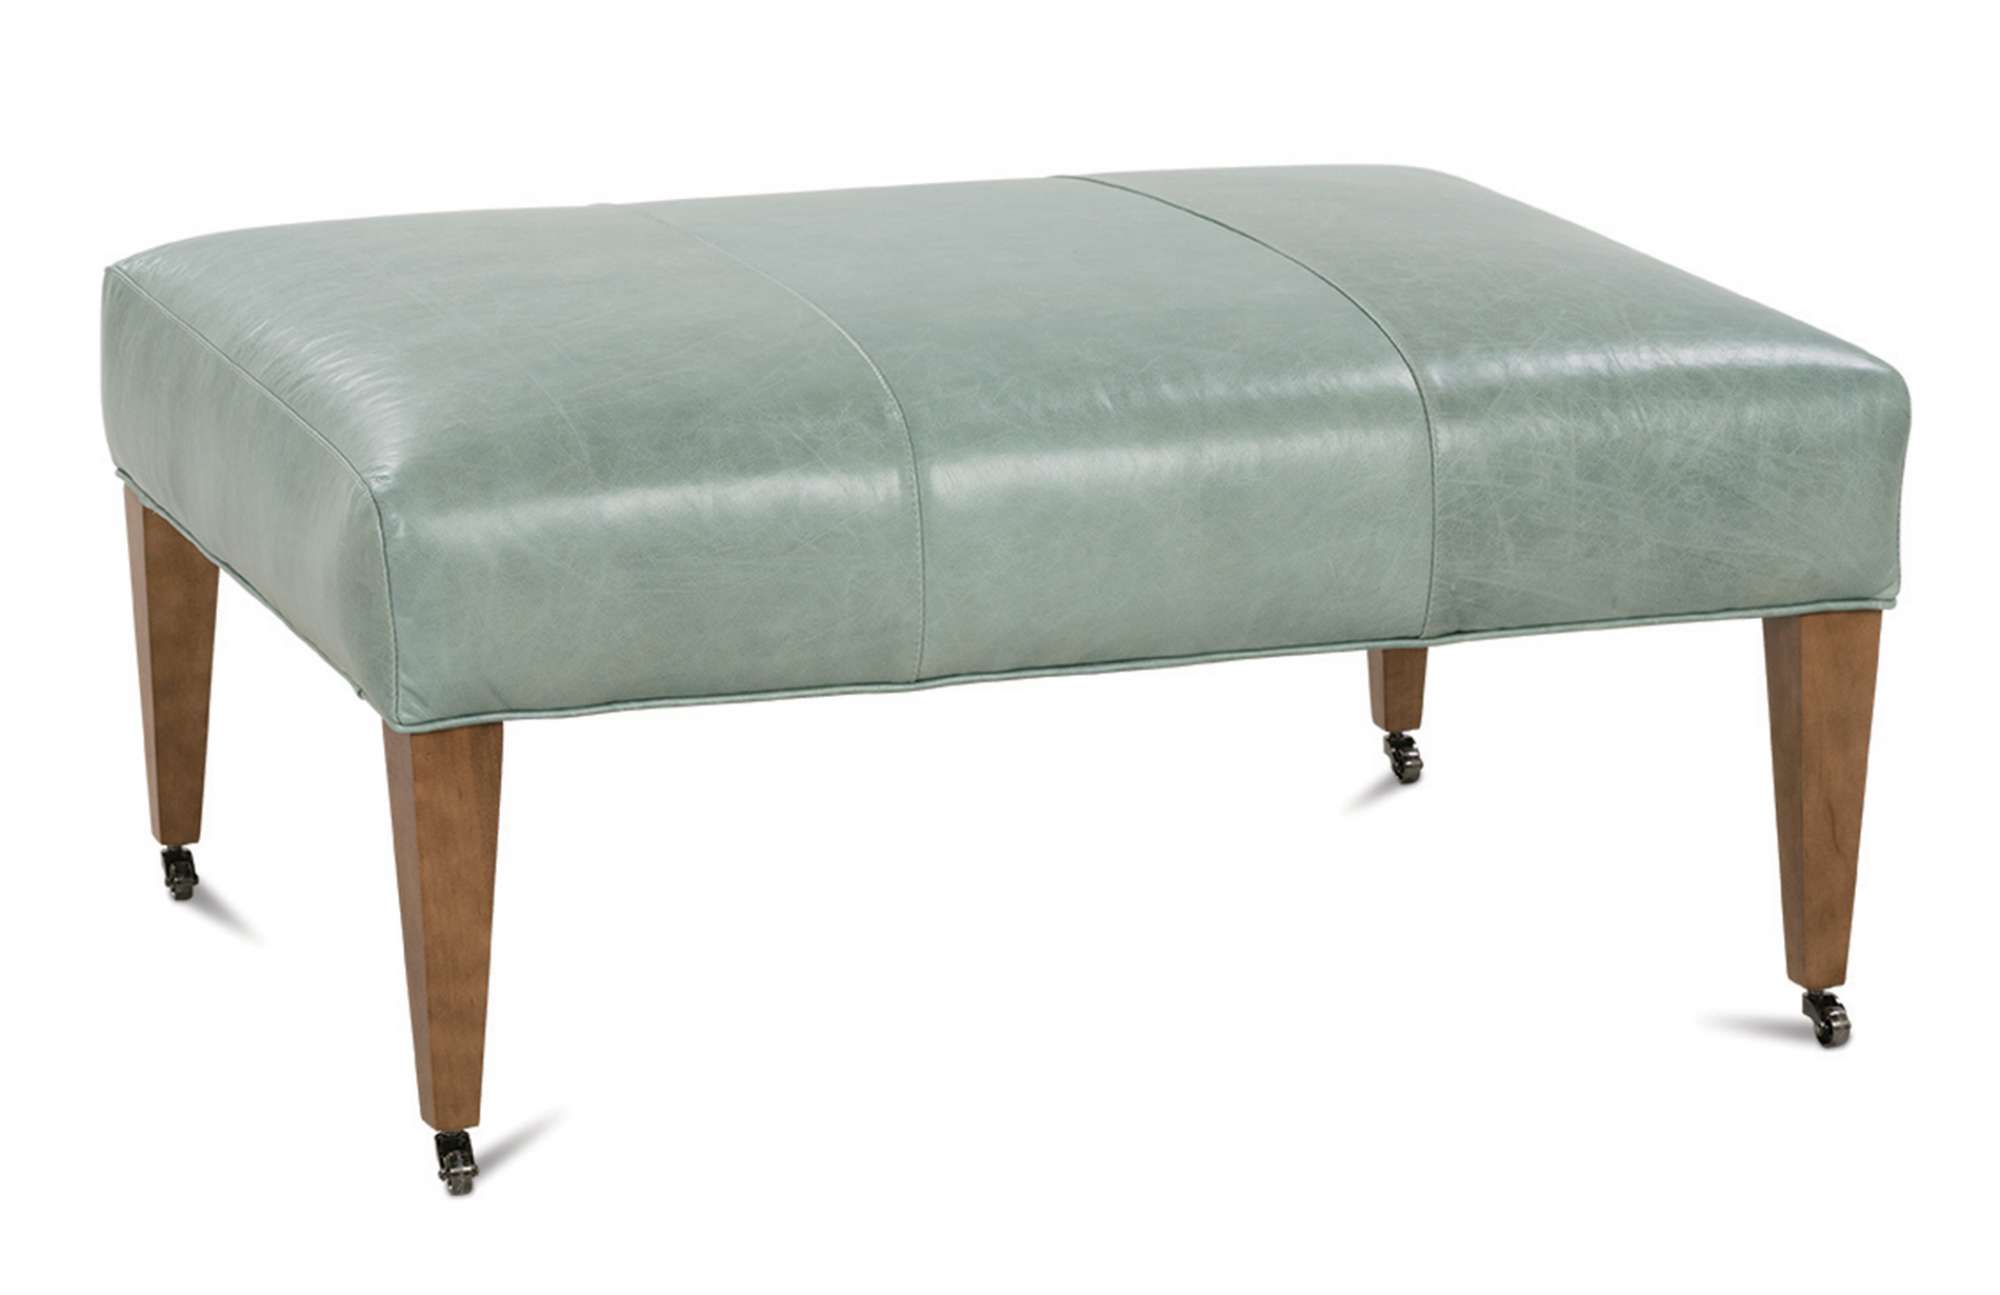 Ashby Leather Ottoman (click for details)